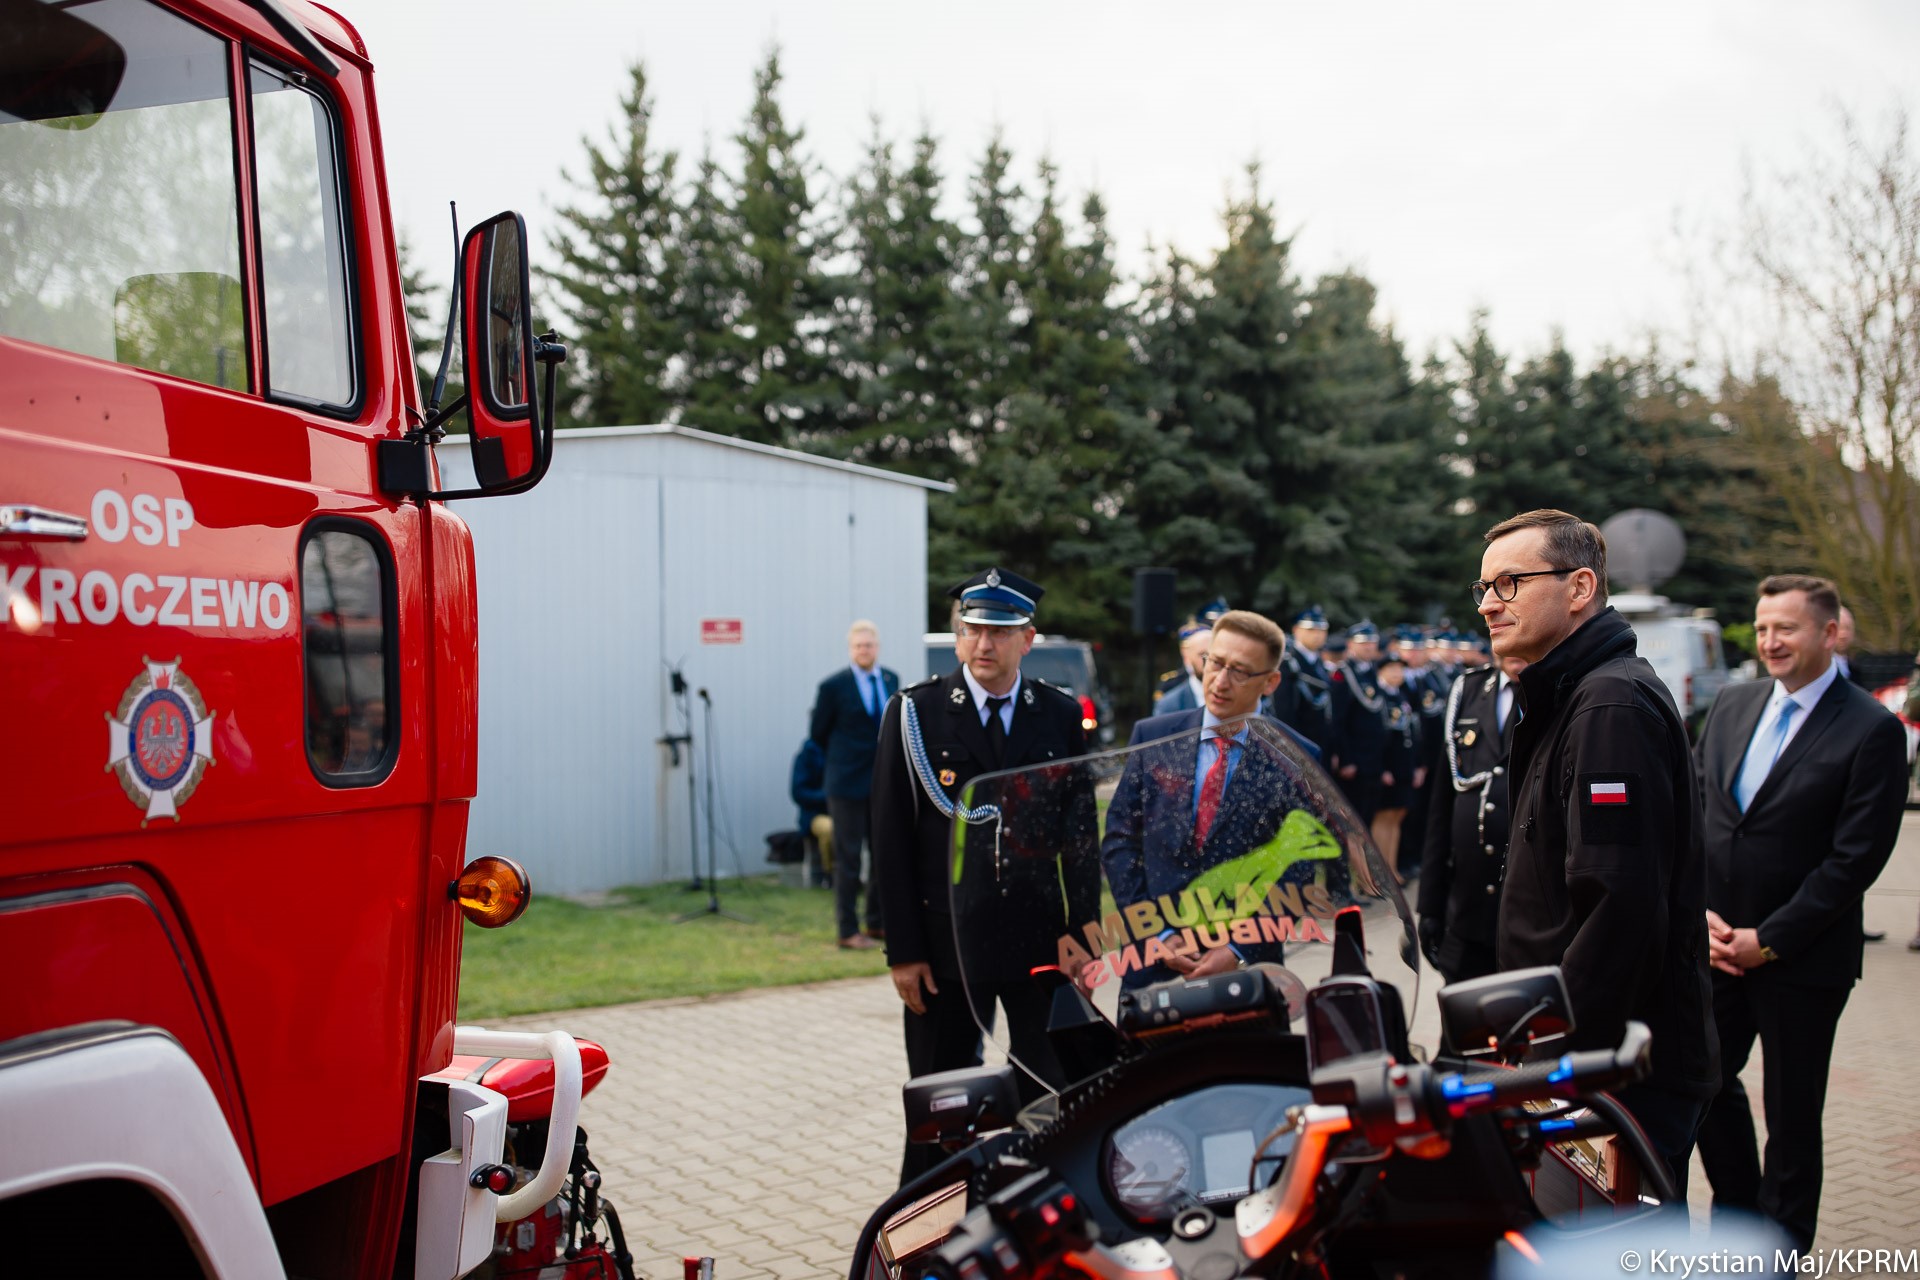 Poland's monk-firefighters given new engine to help protect